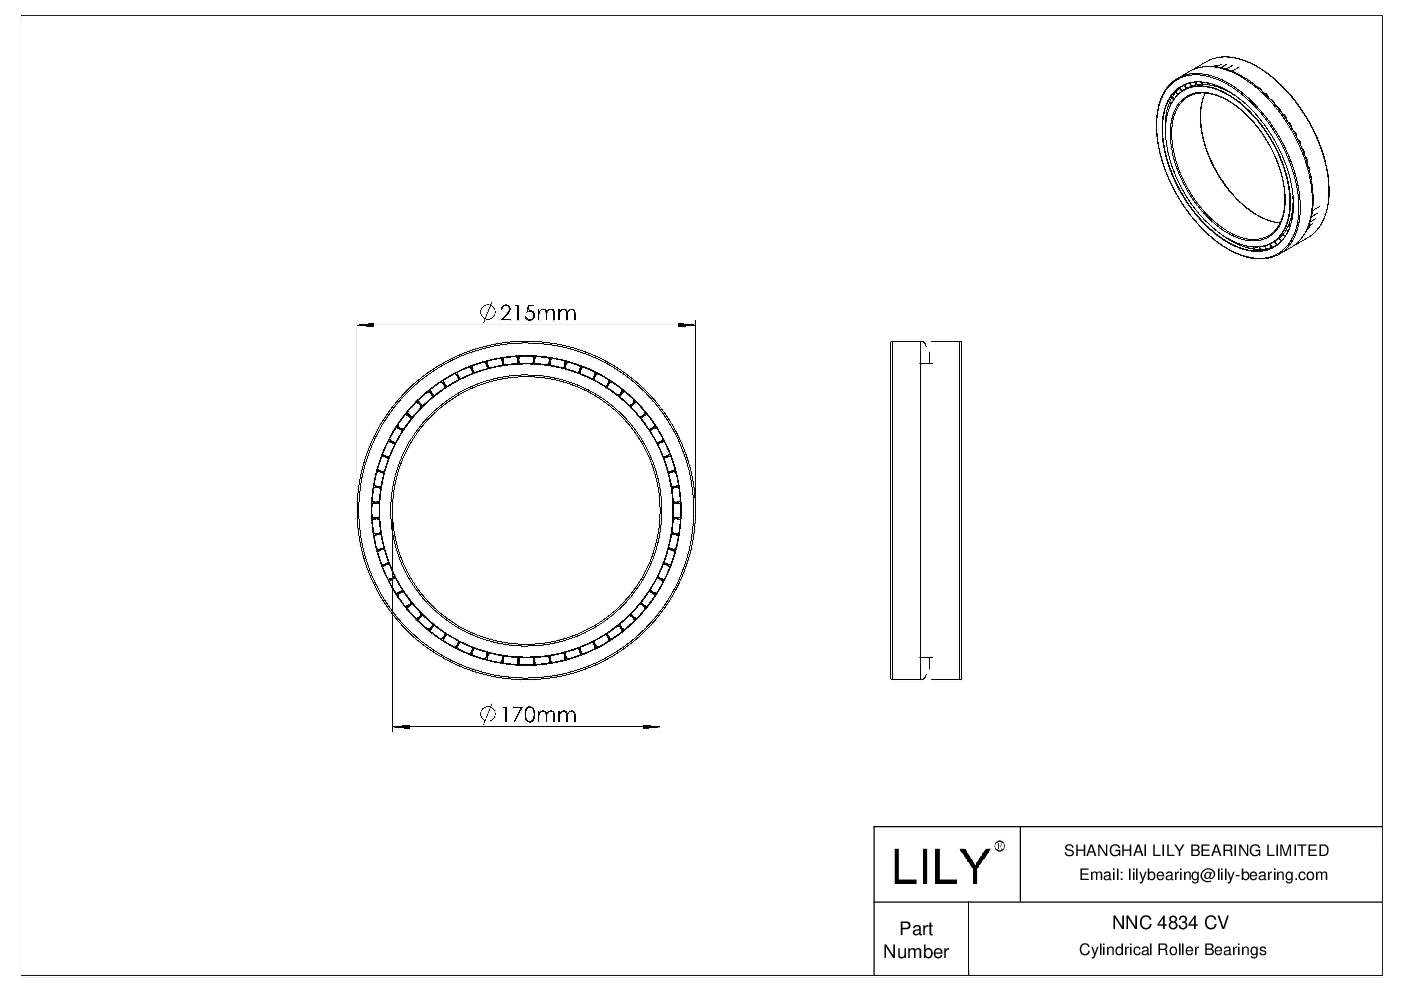 NNC 4834 CV Double Row Full Complement Cylindrical Roller Bearings cad drawing